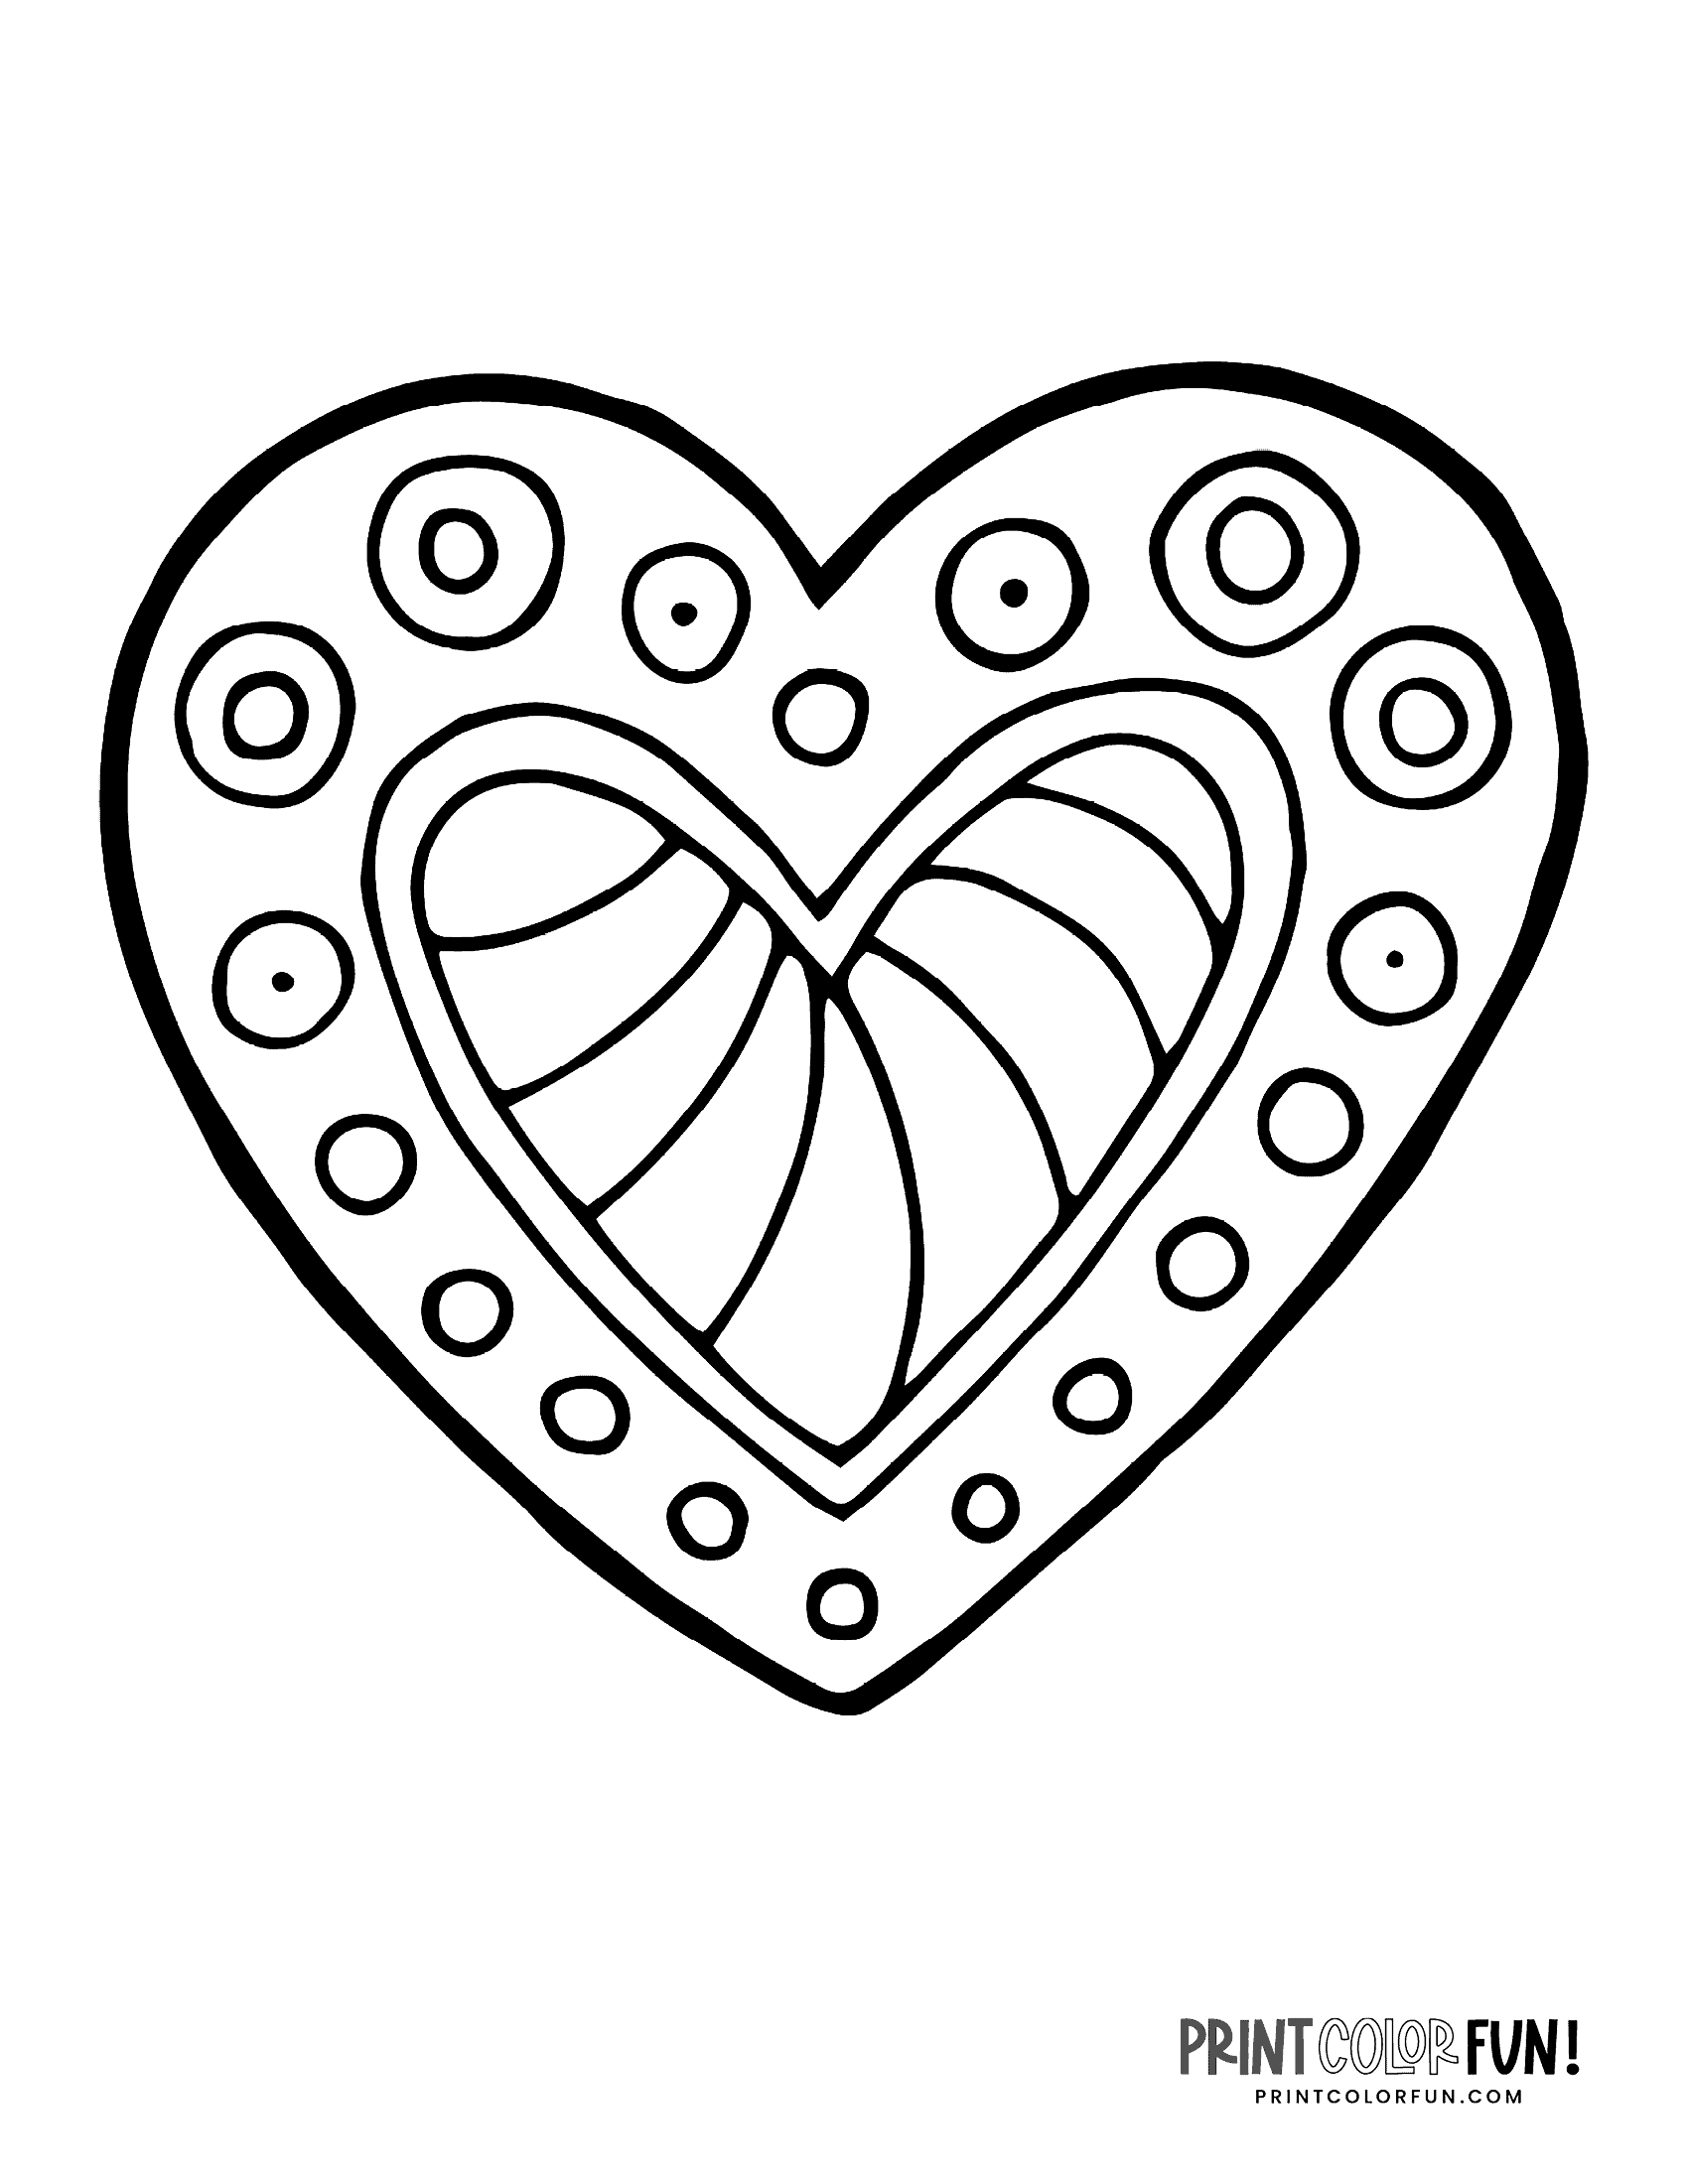 100-heart-coloring-pages-a-huge-collection-of-free-valentine-s-day